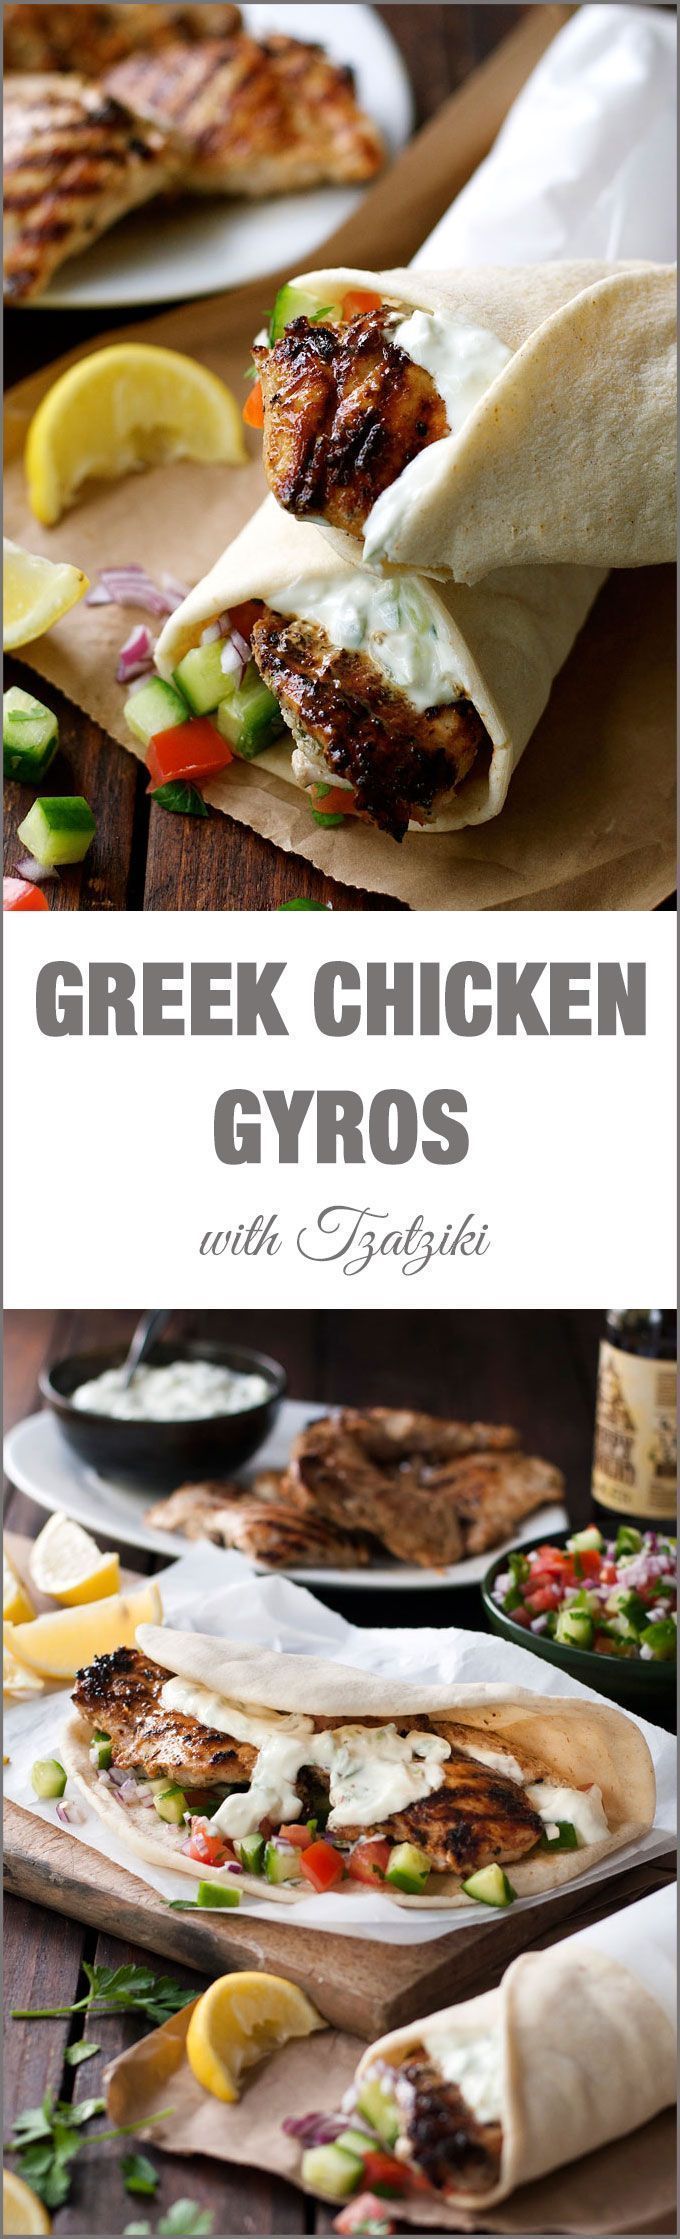 Greek Chicken Gyros with Tzatziki – the marinade for the chicken is so good, I use